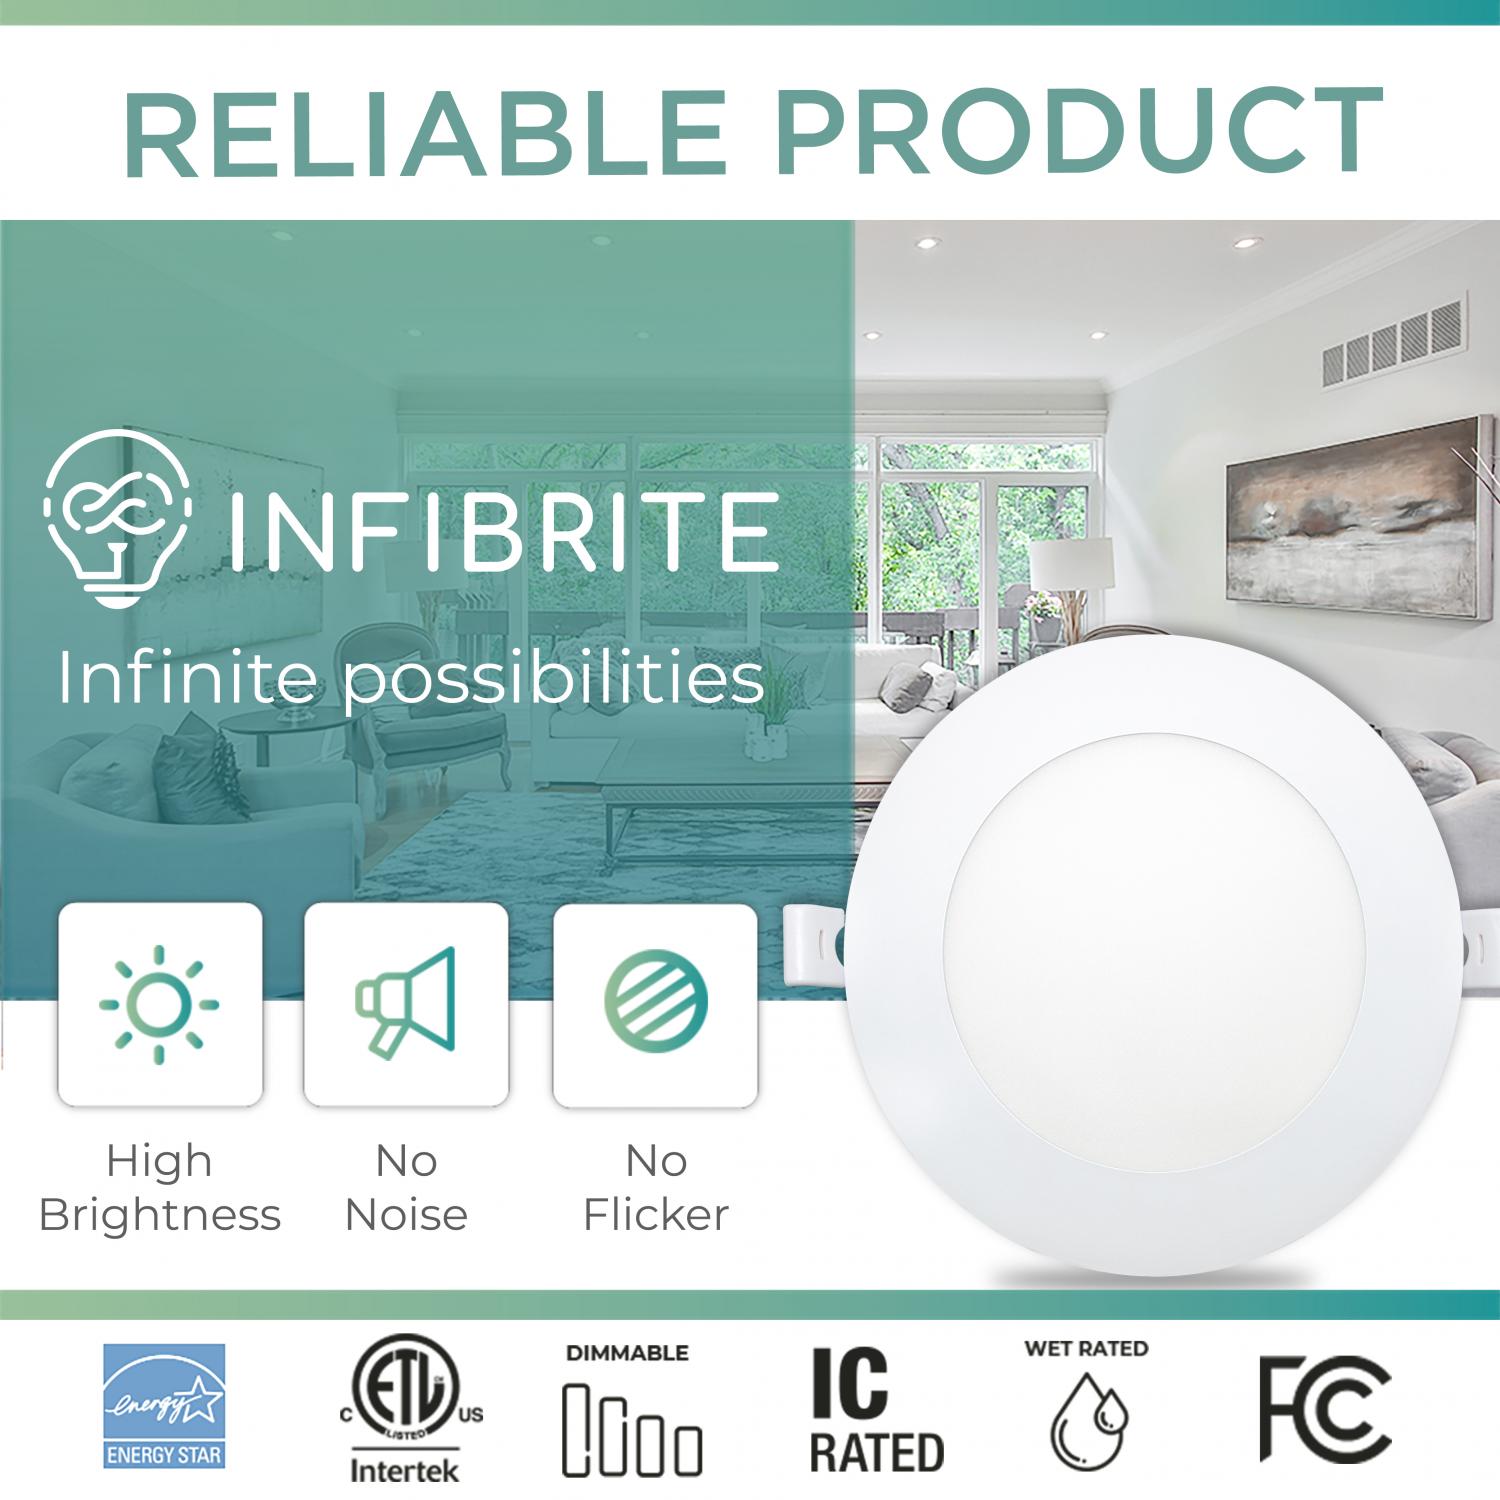 Infibrite 6 Inch 4000K Cool White 12W 1050LM Ultra-Slim LED Ceiling Light with Junction Box, Flush Mount, Dimmable, Fixture for Bedroom, Wet Rated for Bathroom, Easy Install, 110W Eqv, ETL & Energy Star, US Company (24 Pack)